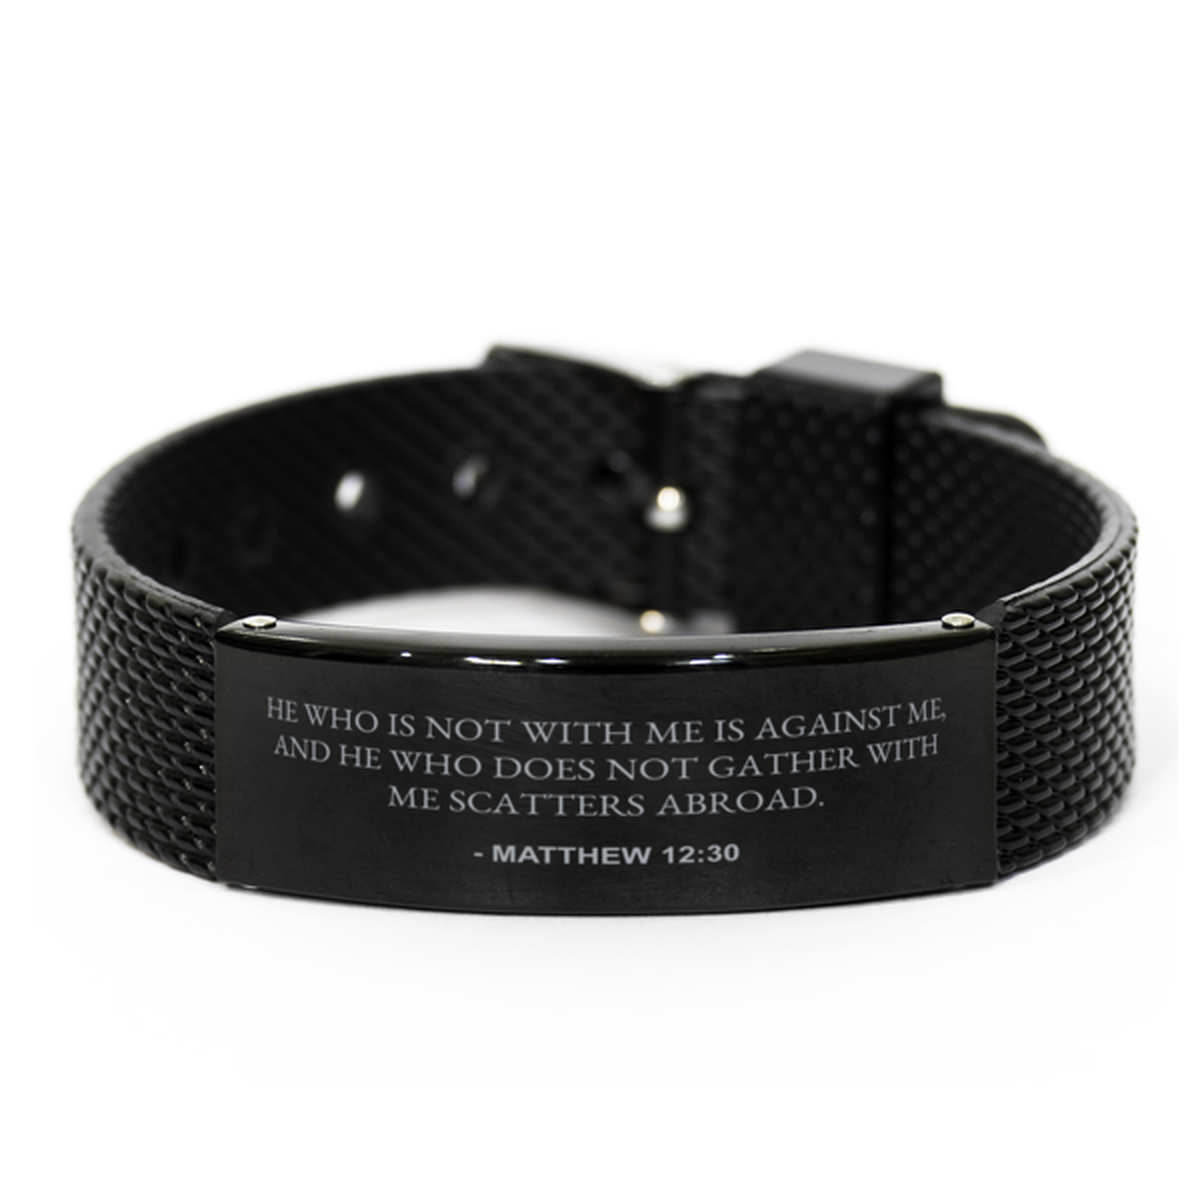 Christian Black Bracelet,, Matthew 12:30 He Who Is Not With Me Is Against Me, And He Who, Motivational Bible Verse Gifts For Men Women